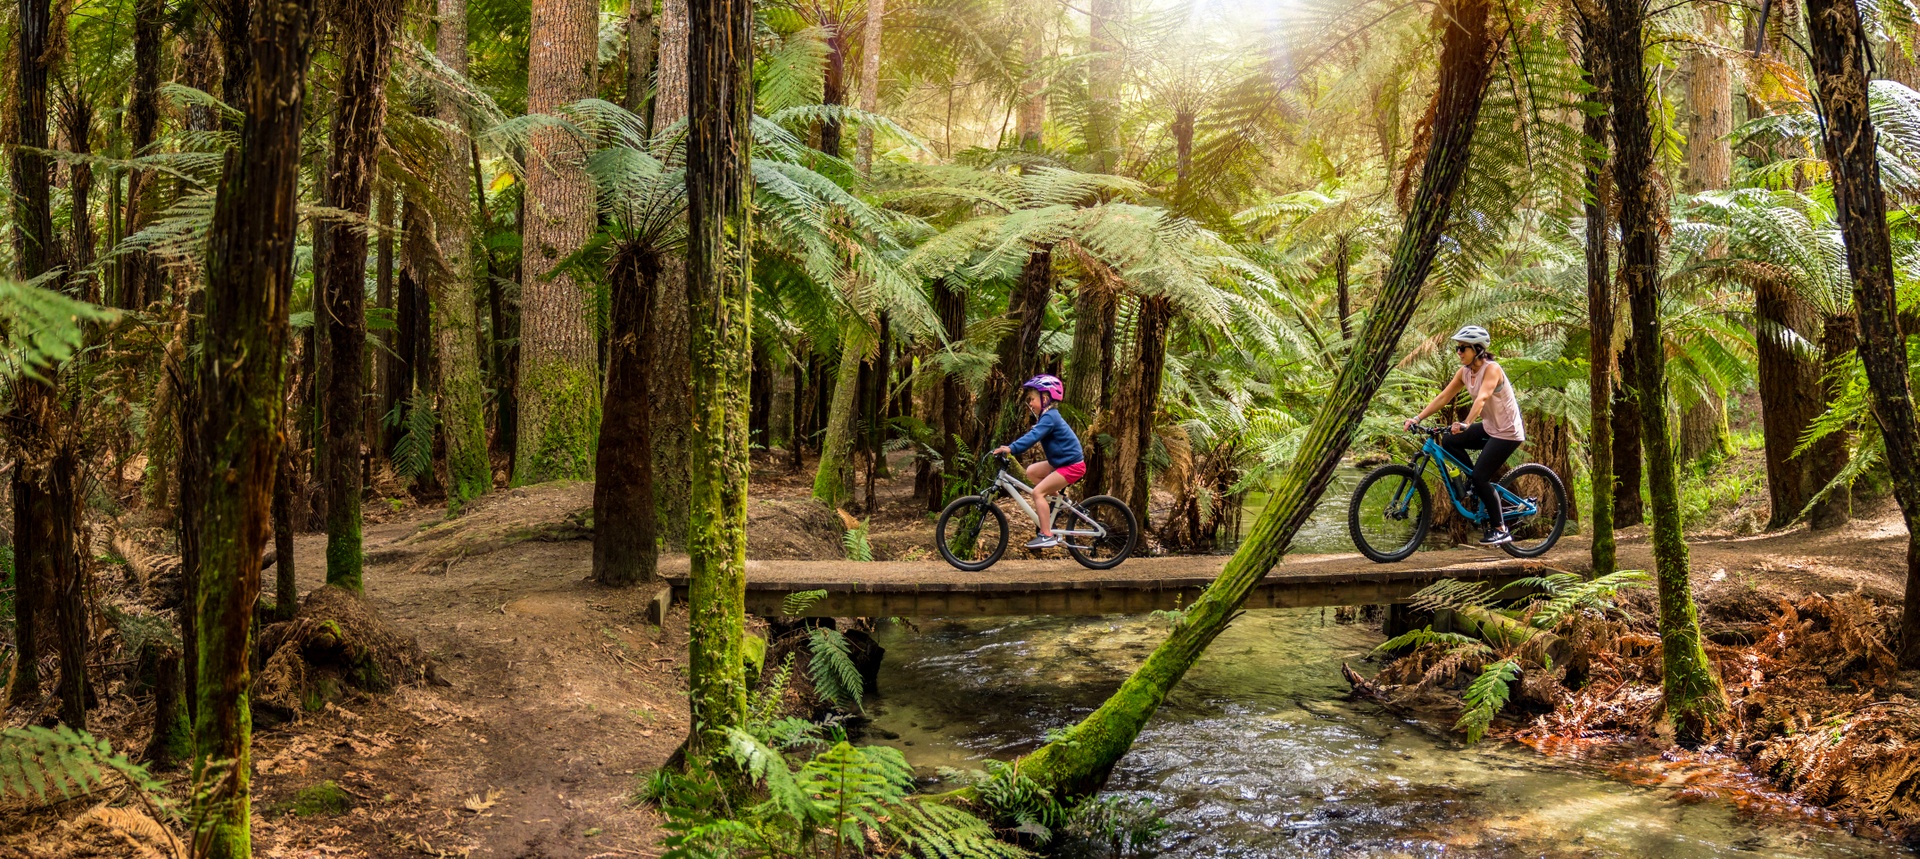 Heading To Rotorua? Here Are Our Top Free Must-Sees